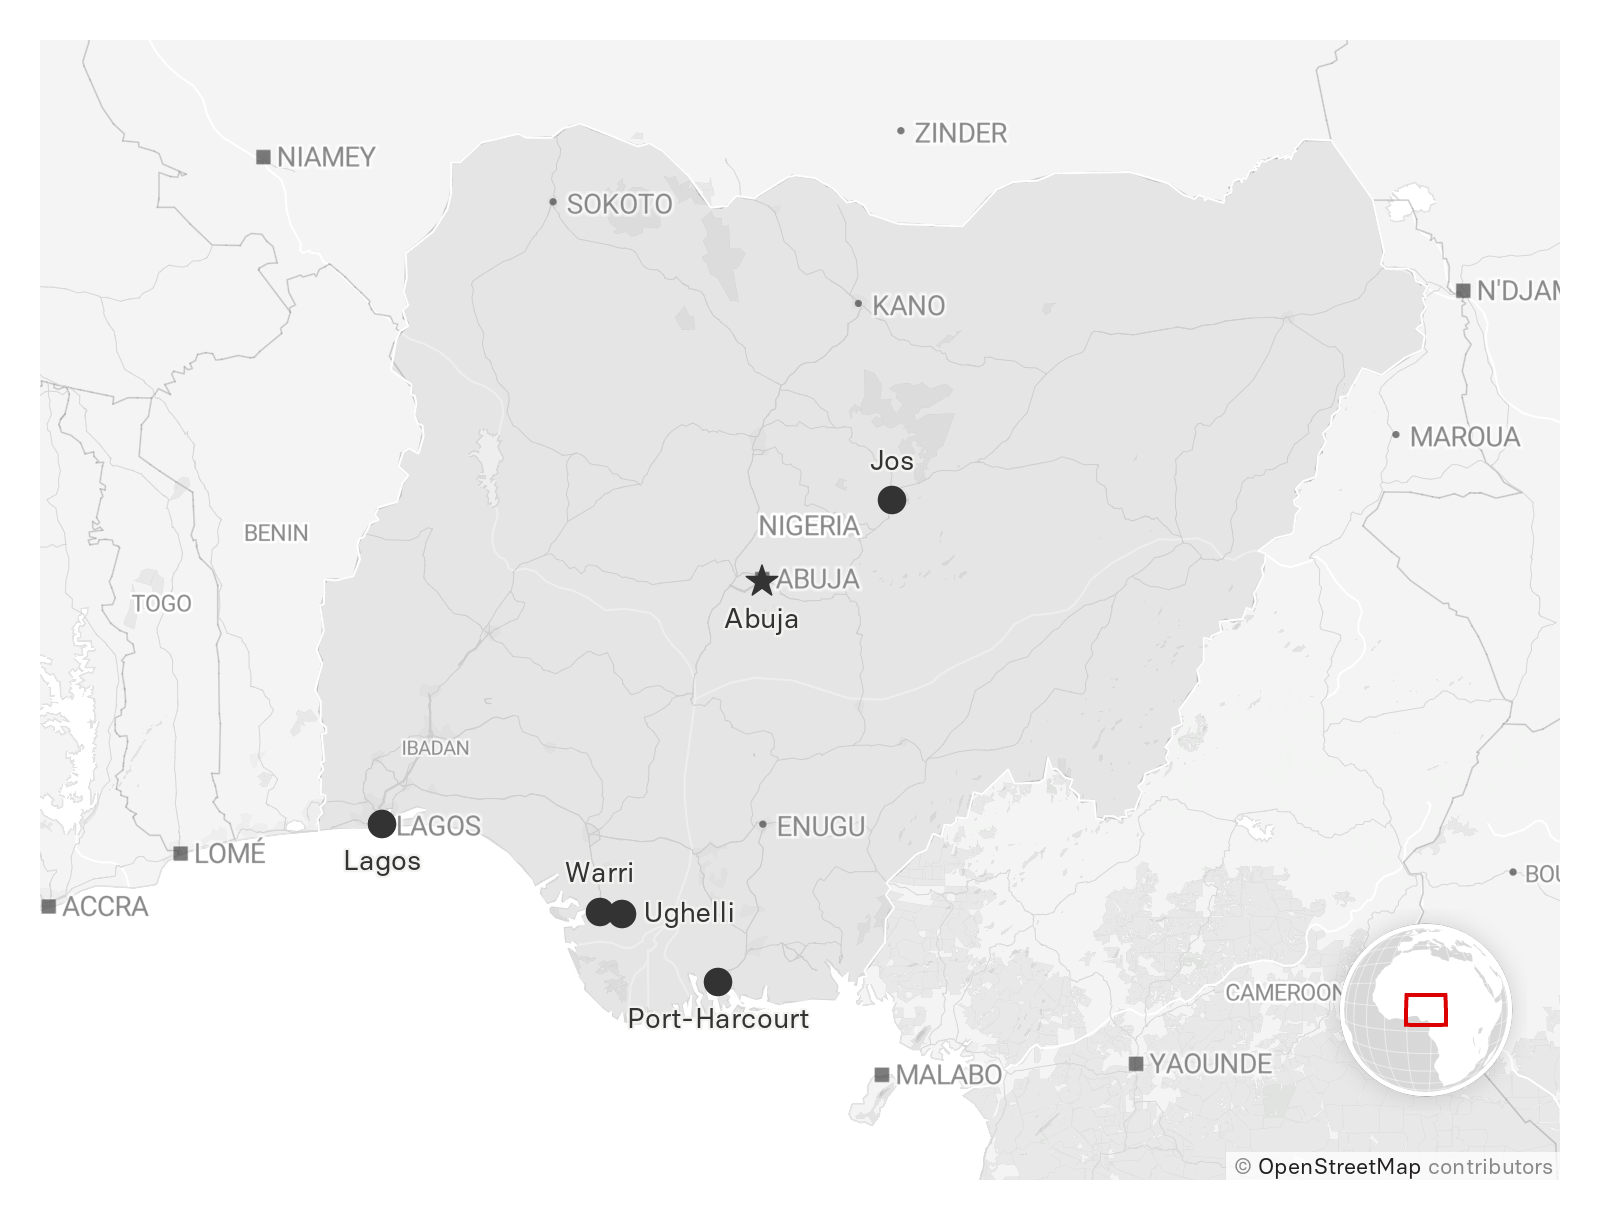 A map points out the locations of Lagos, Jos, Abuja, Warri, Ughelli, and Port Harcourt